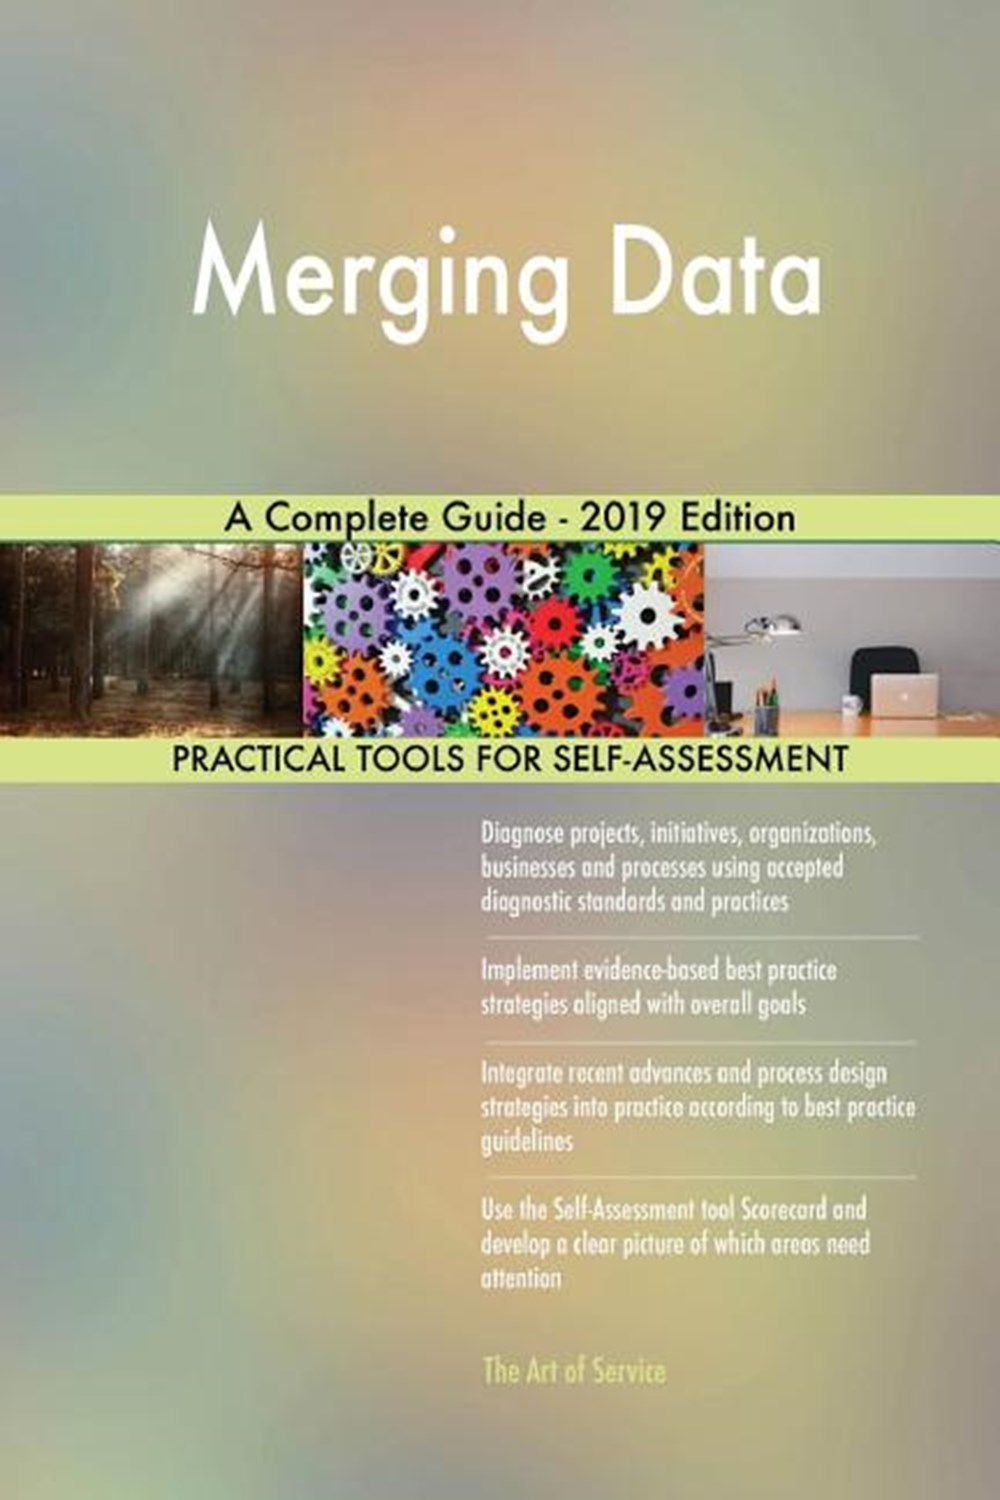 Merging Data A Complete Guide - 2019 Edition